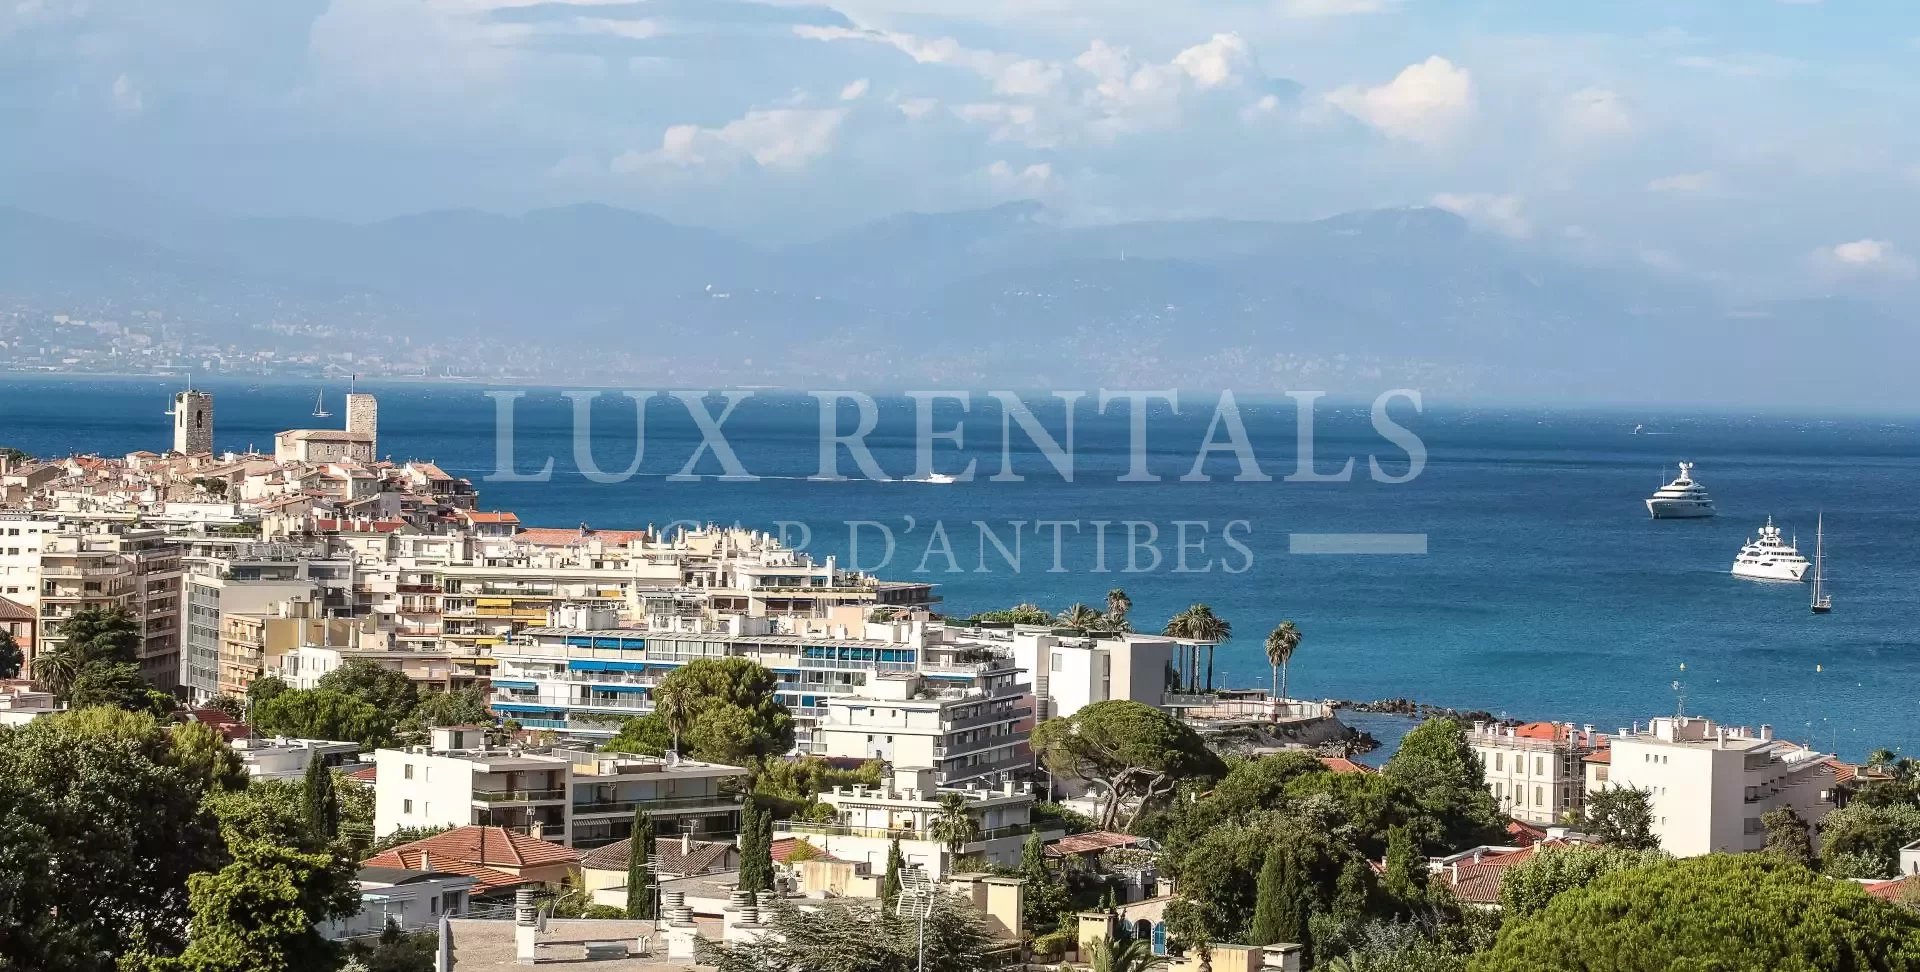 Thumbnail 13 Vente Appartement - Antibes Rostagne